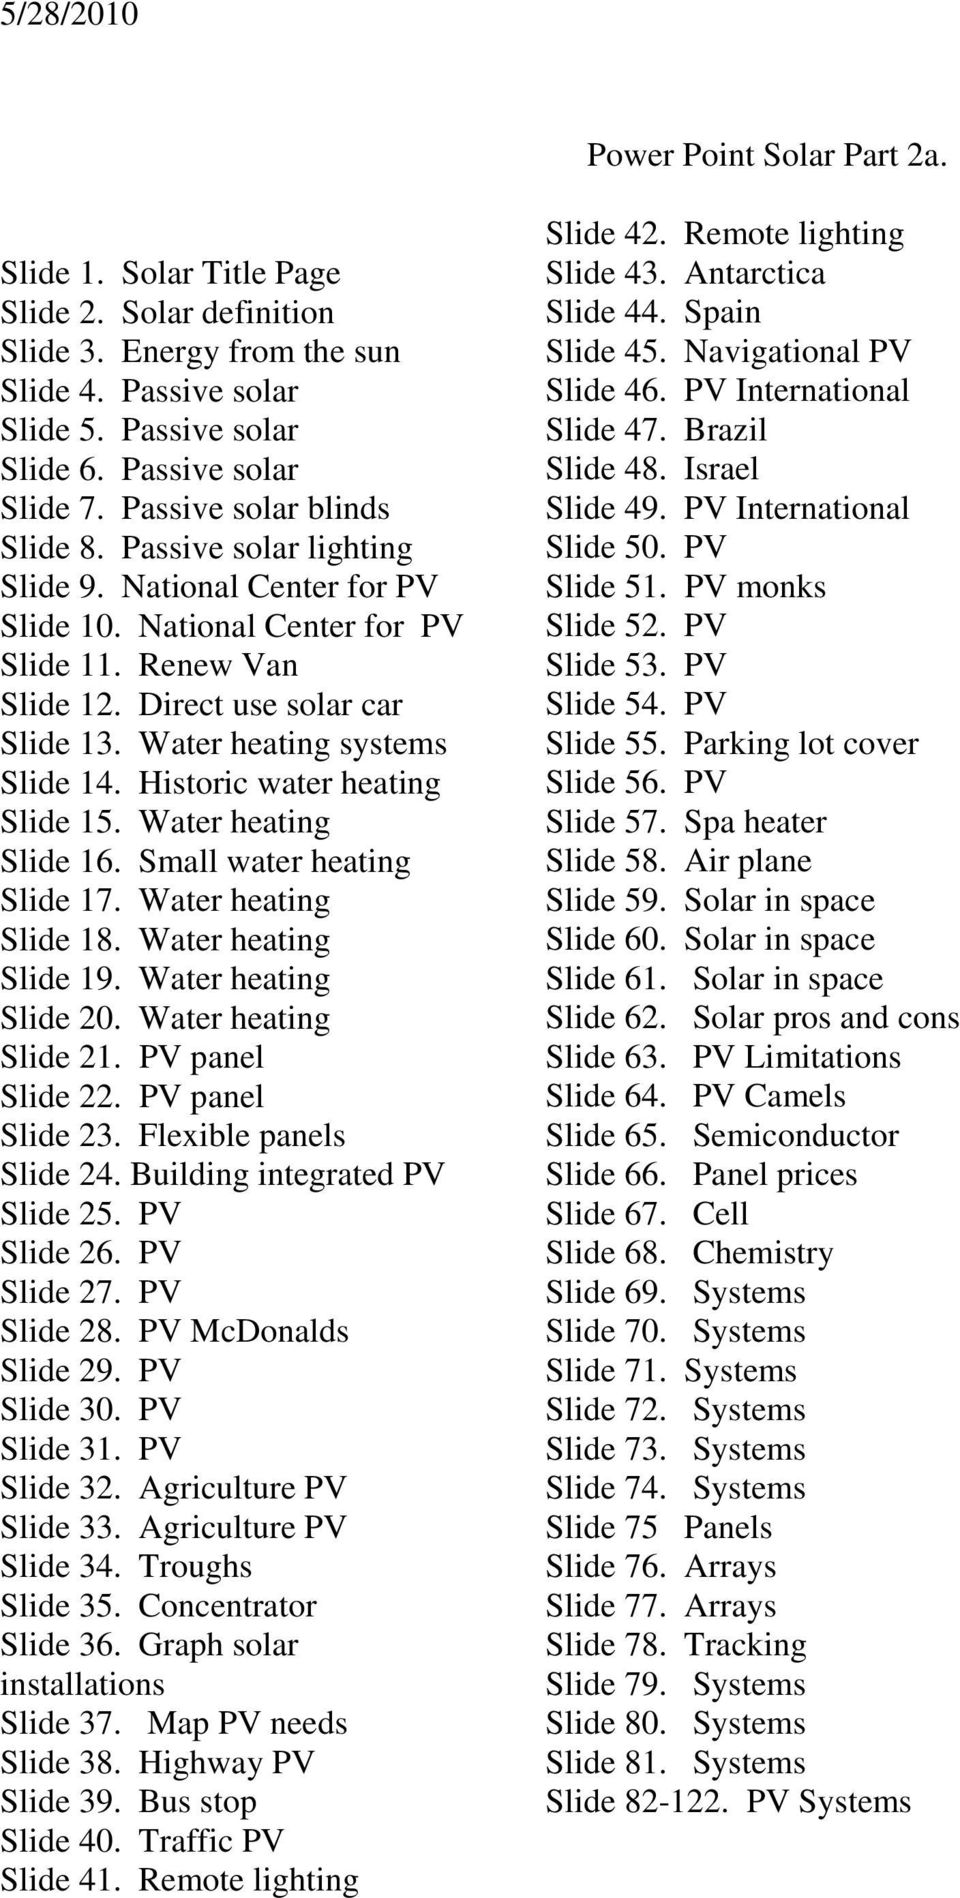 Water heating systems Slide 14. Historic water heating Slide 15. Water heating Slide 16. Small water heating Slide 17. Water heating Slide 18. Water heating Slide 19. Water heating Slide 20.